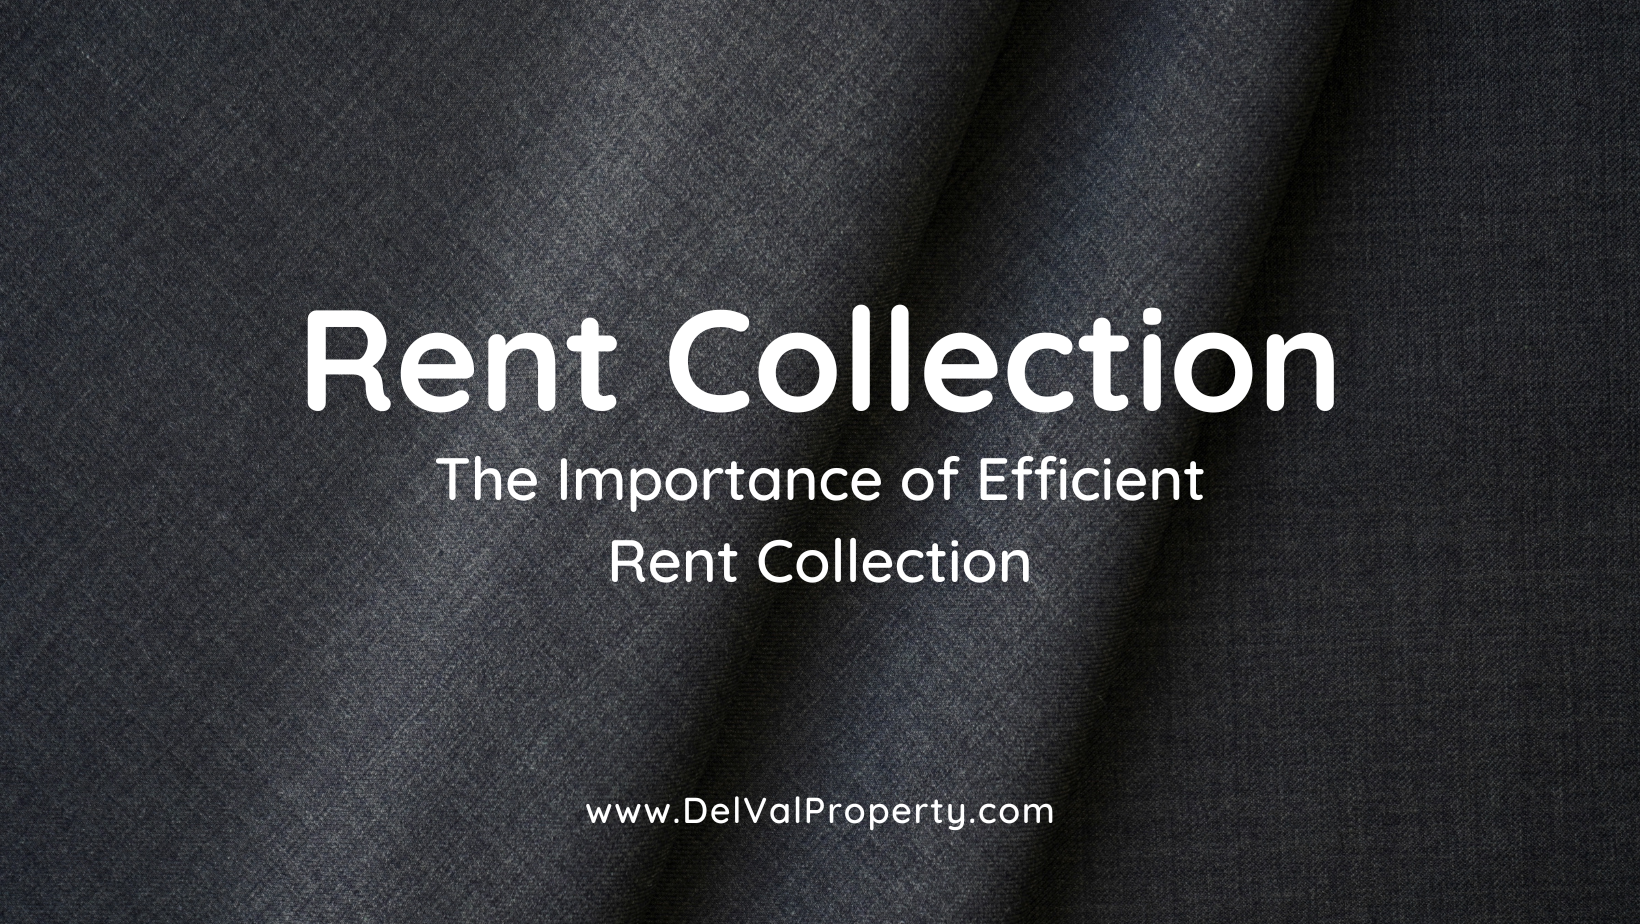 Real Estate Investors: The Importance of Efficient Rent Collection